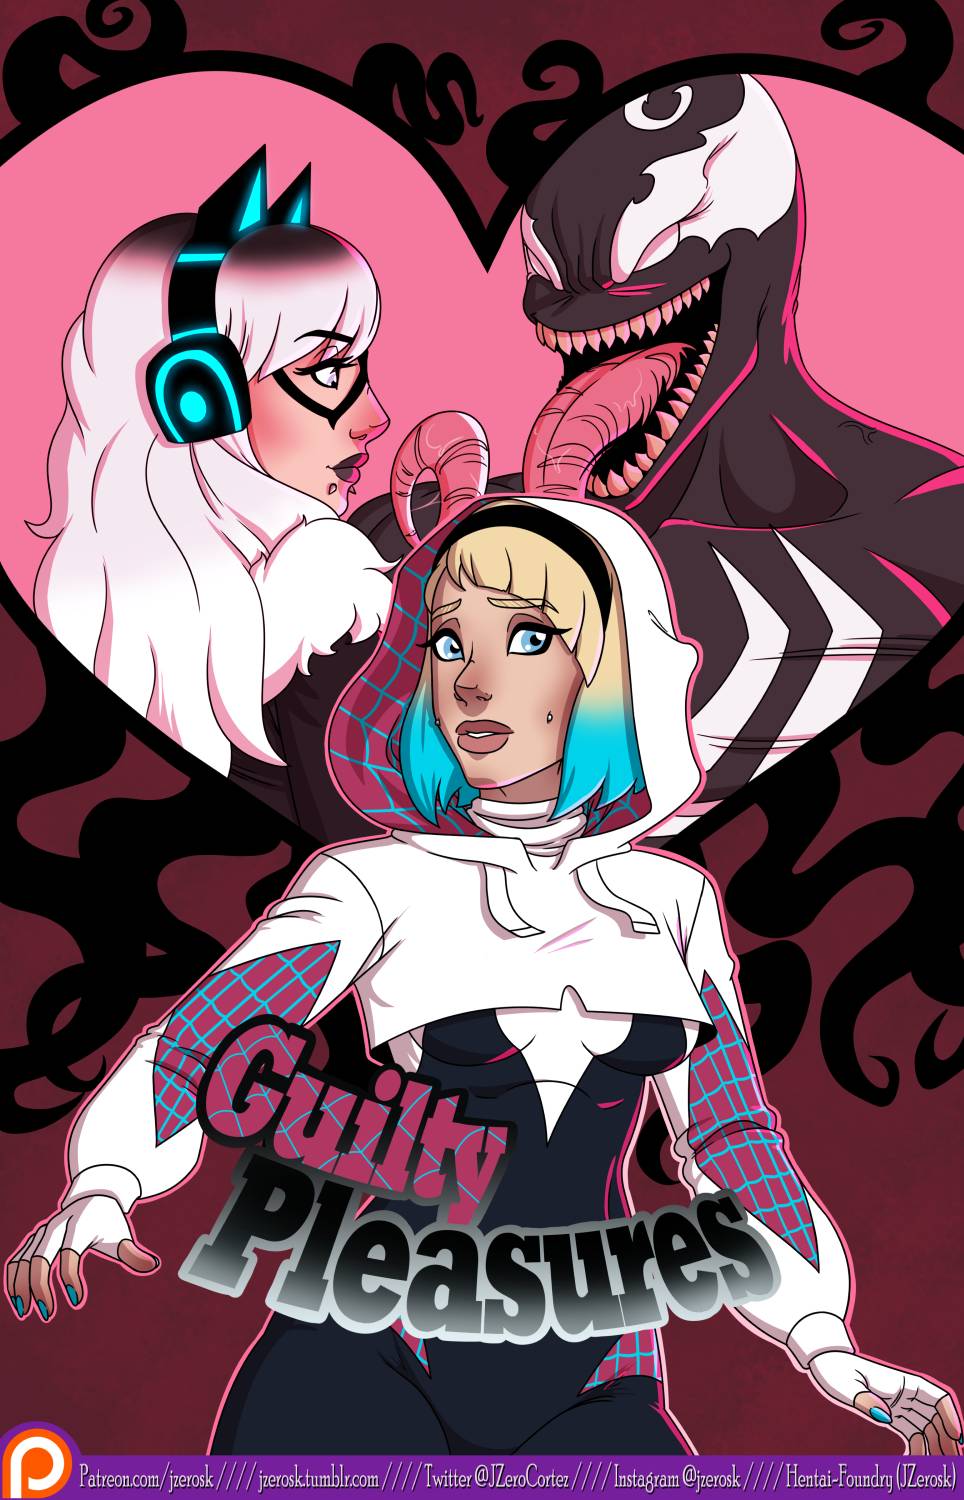 Guilty Pleasures by Jzerosk Ongoing Porn Comic